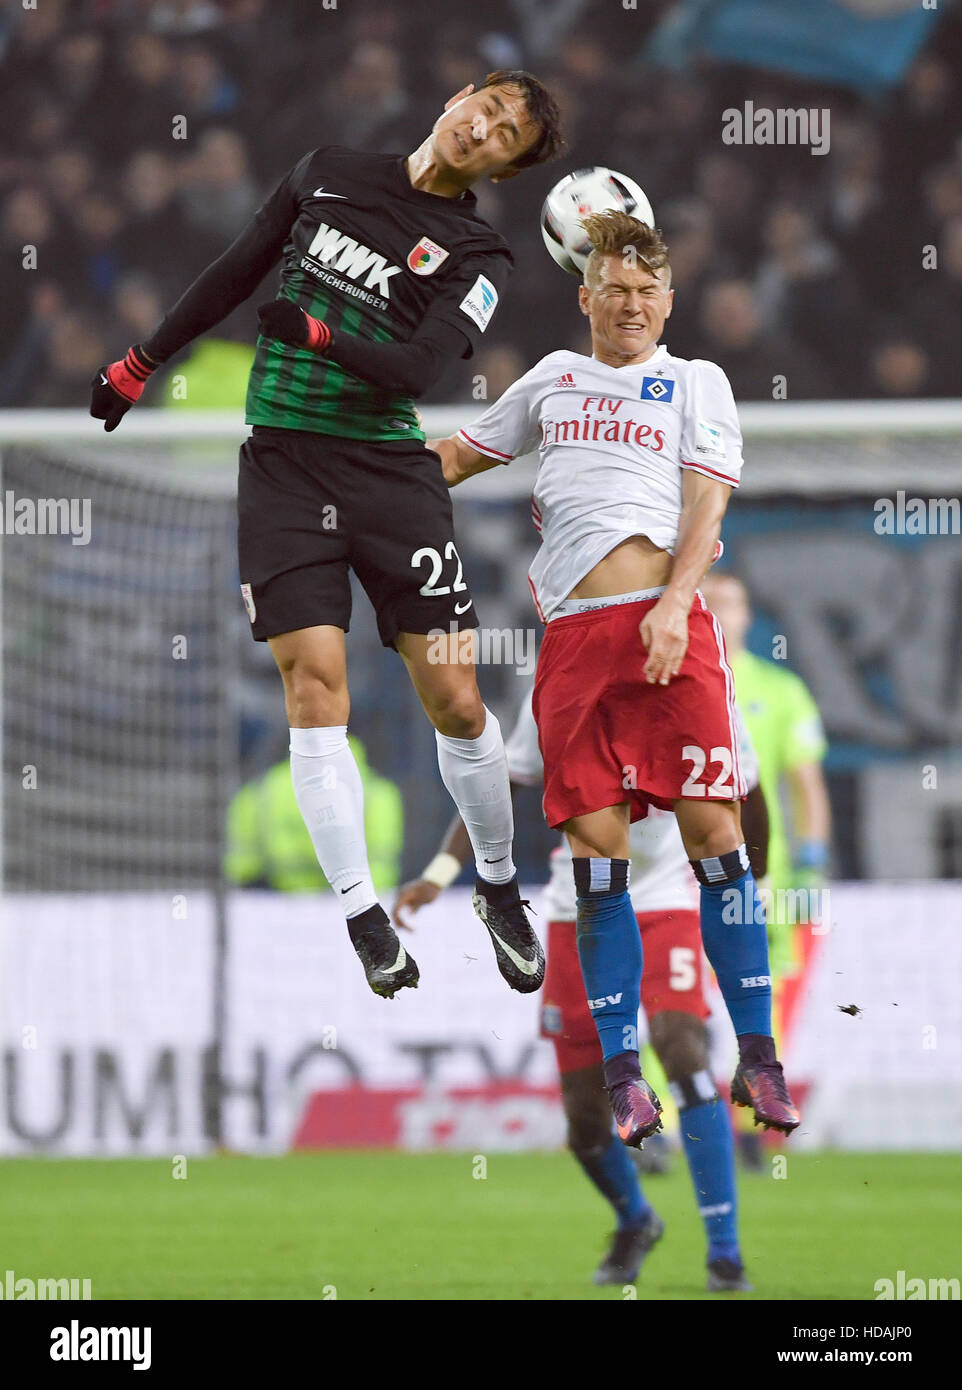 Hamburg, Germany. 10th Dec, 2016. Augsburg's Ji Dong Won (l) and Hamburg's Matthias Ostrzolek vie for the ball during the German Bundesliga football match between Hamburg SV and FC Augsburg at the Volksparkstadion in Hamburg, Germany, 10 December 2016. (EMBARGO CONDITIONS - ATTENTION: Due to the accreditation guidelines, the DFL only permits the publication and utilisation of up to 15 pictures per match on the internet and in online media during the match.) Photo: Axel Heimken/dpa/Alamy Live News Stock Photo